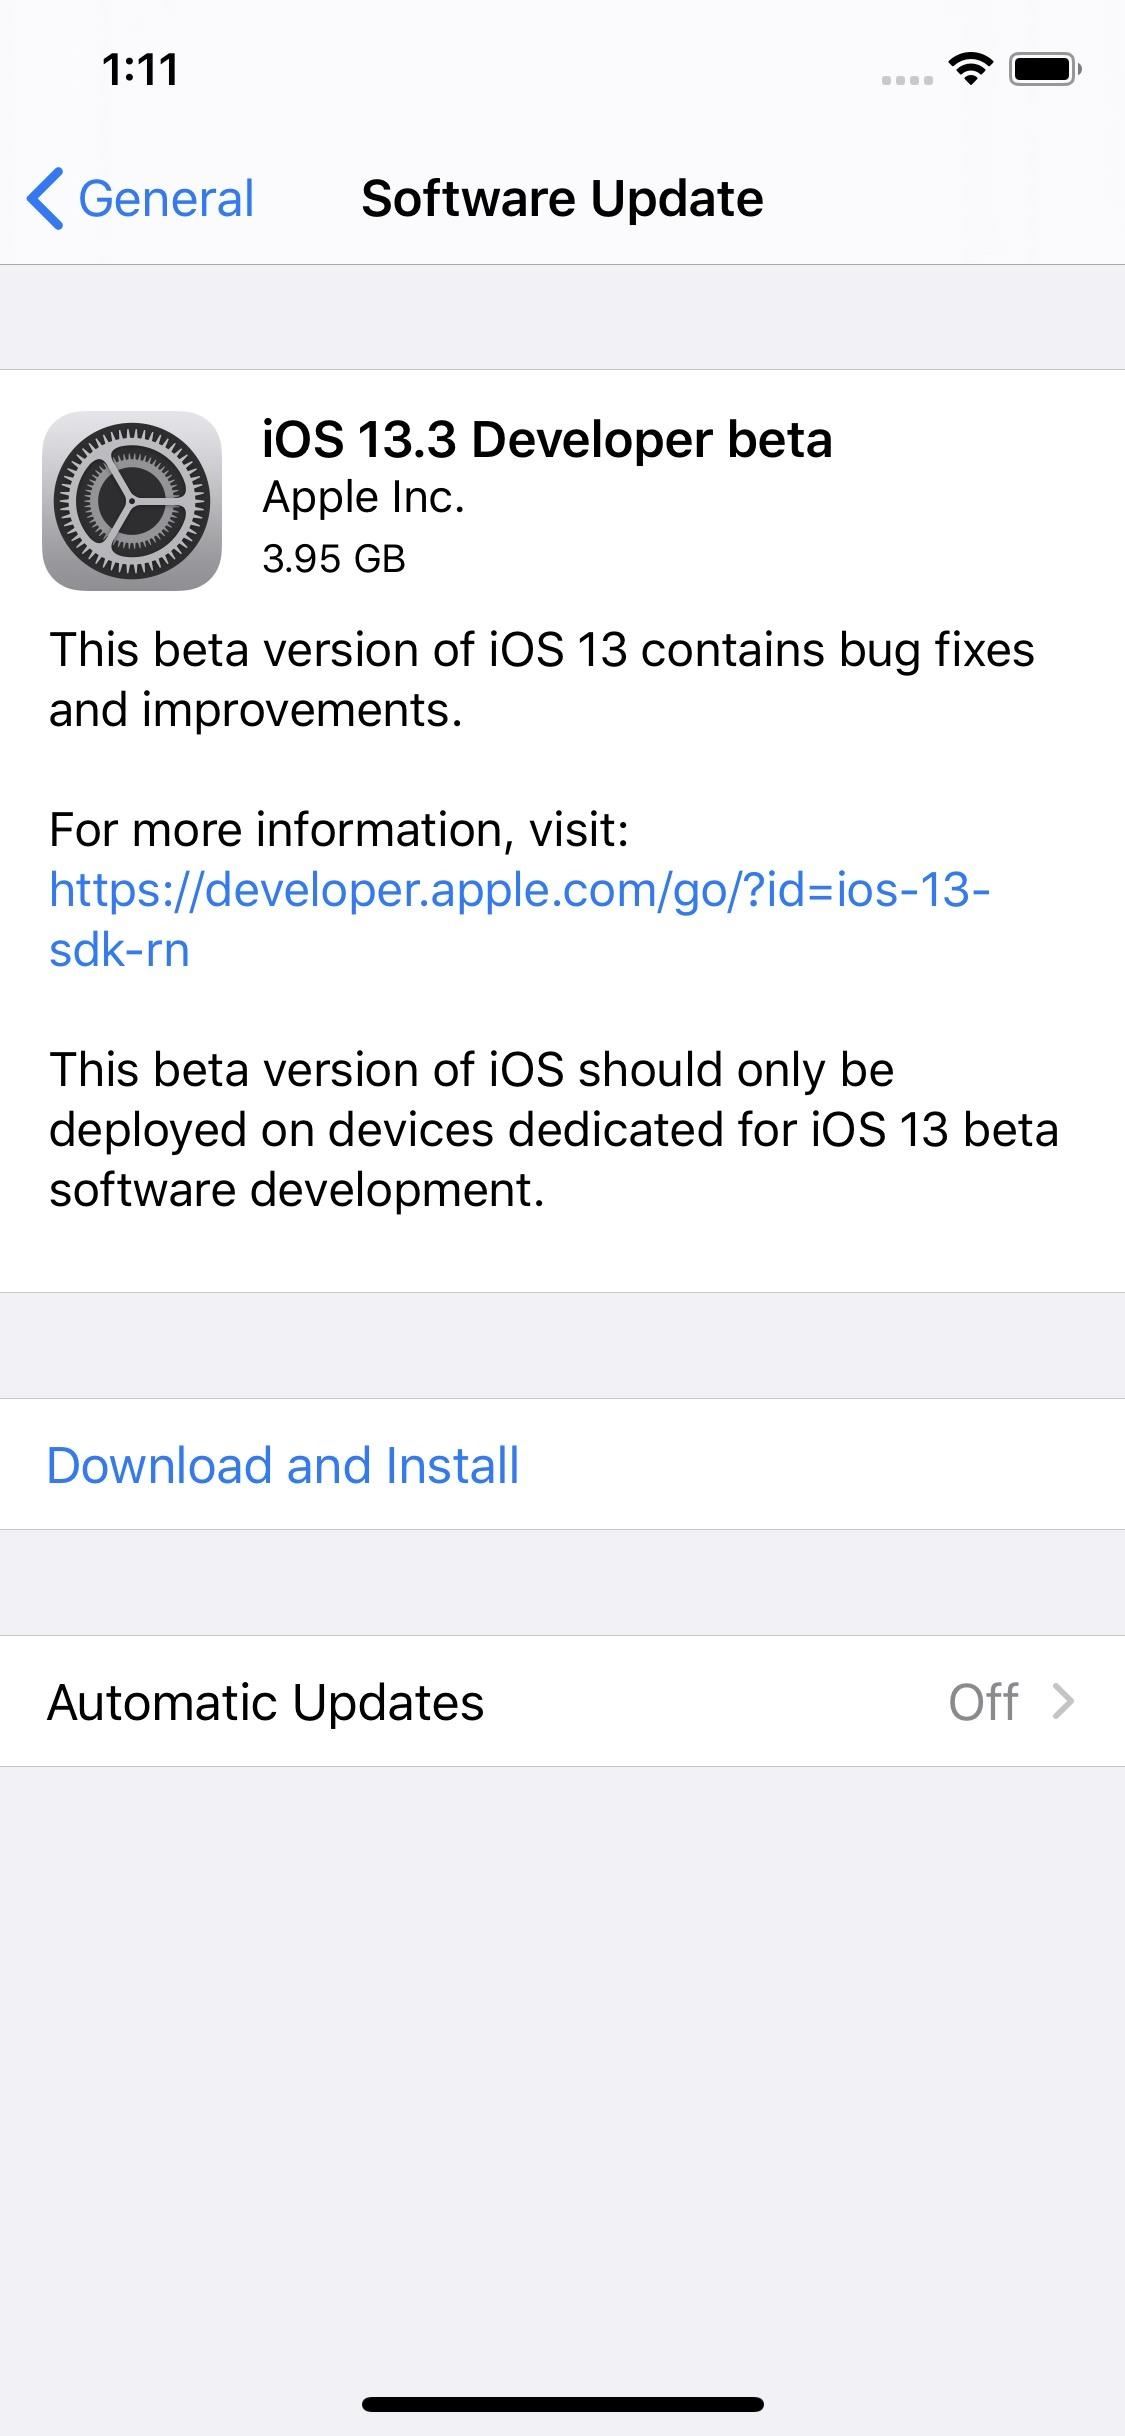 Apple Releases iOS 13.3 Beta 1 to iPhone Developers, Includes Fix for Multitasking Bug